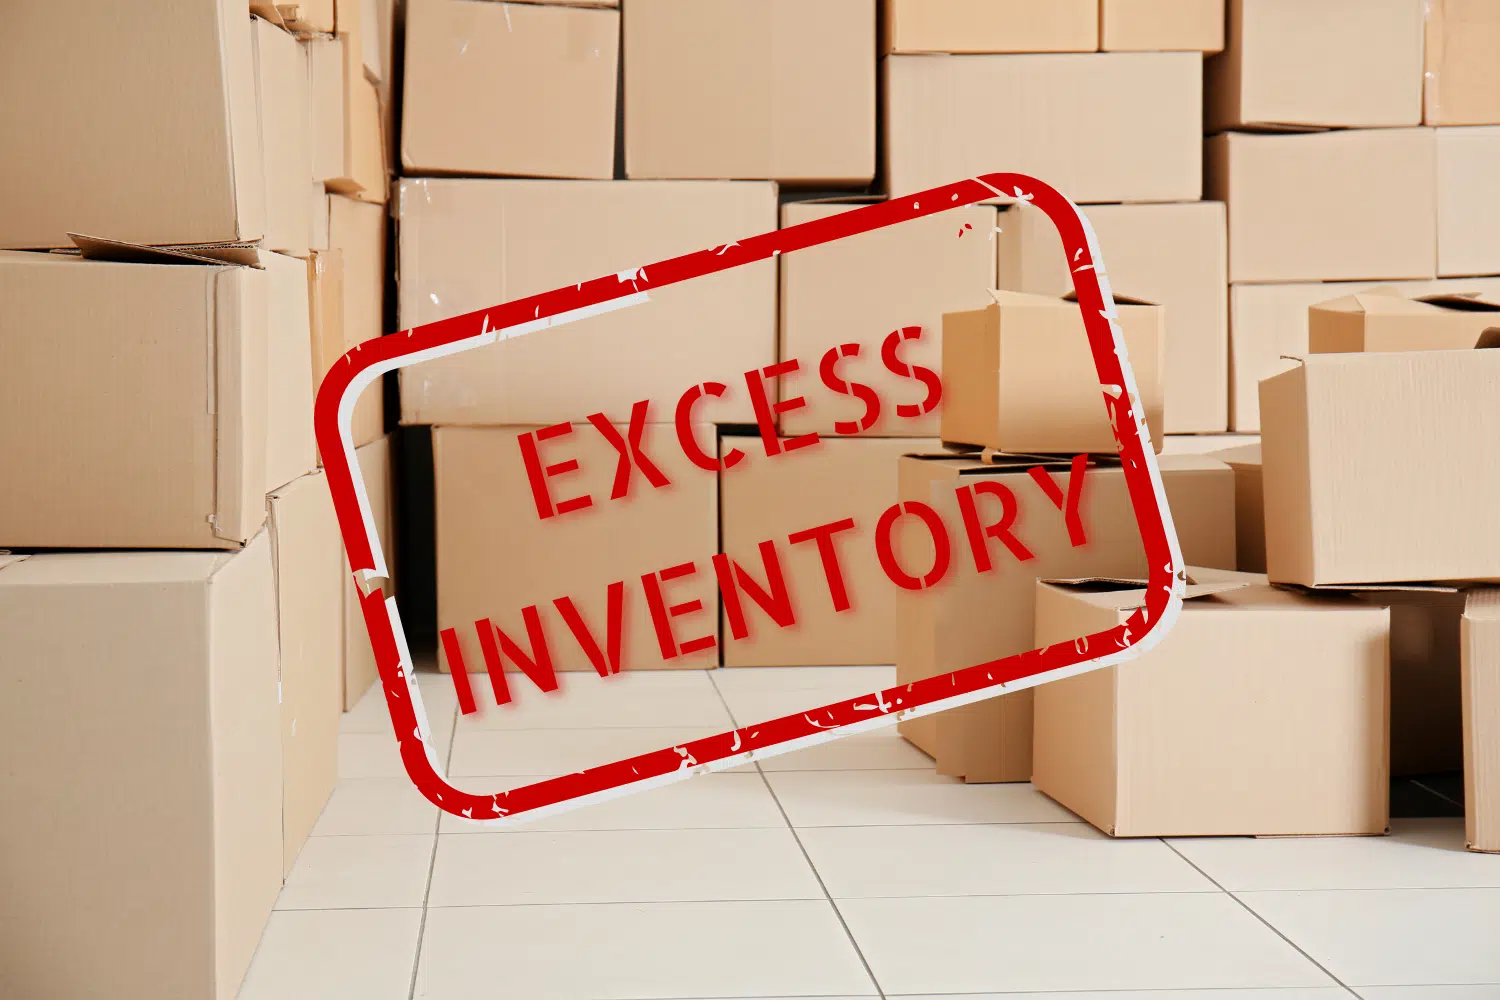 Excess Inventory